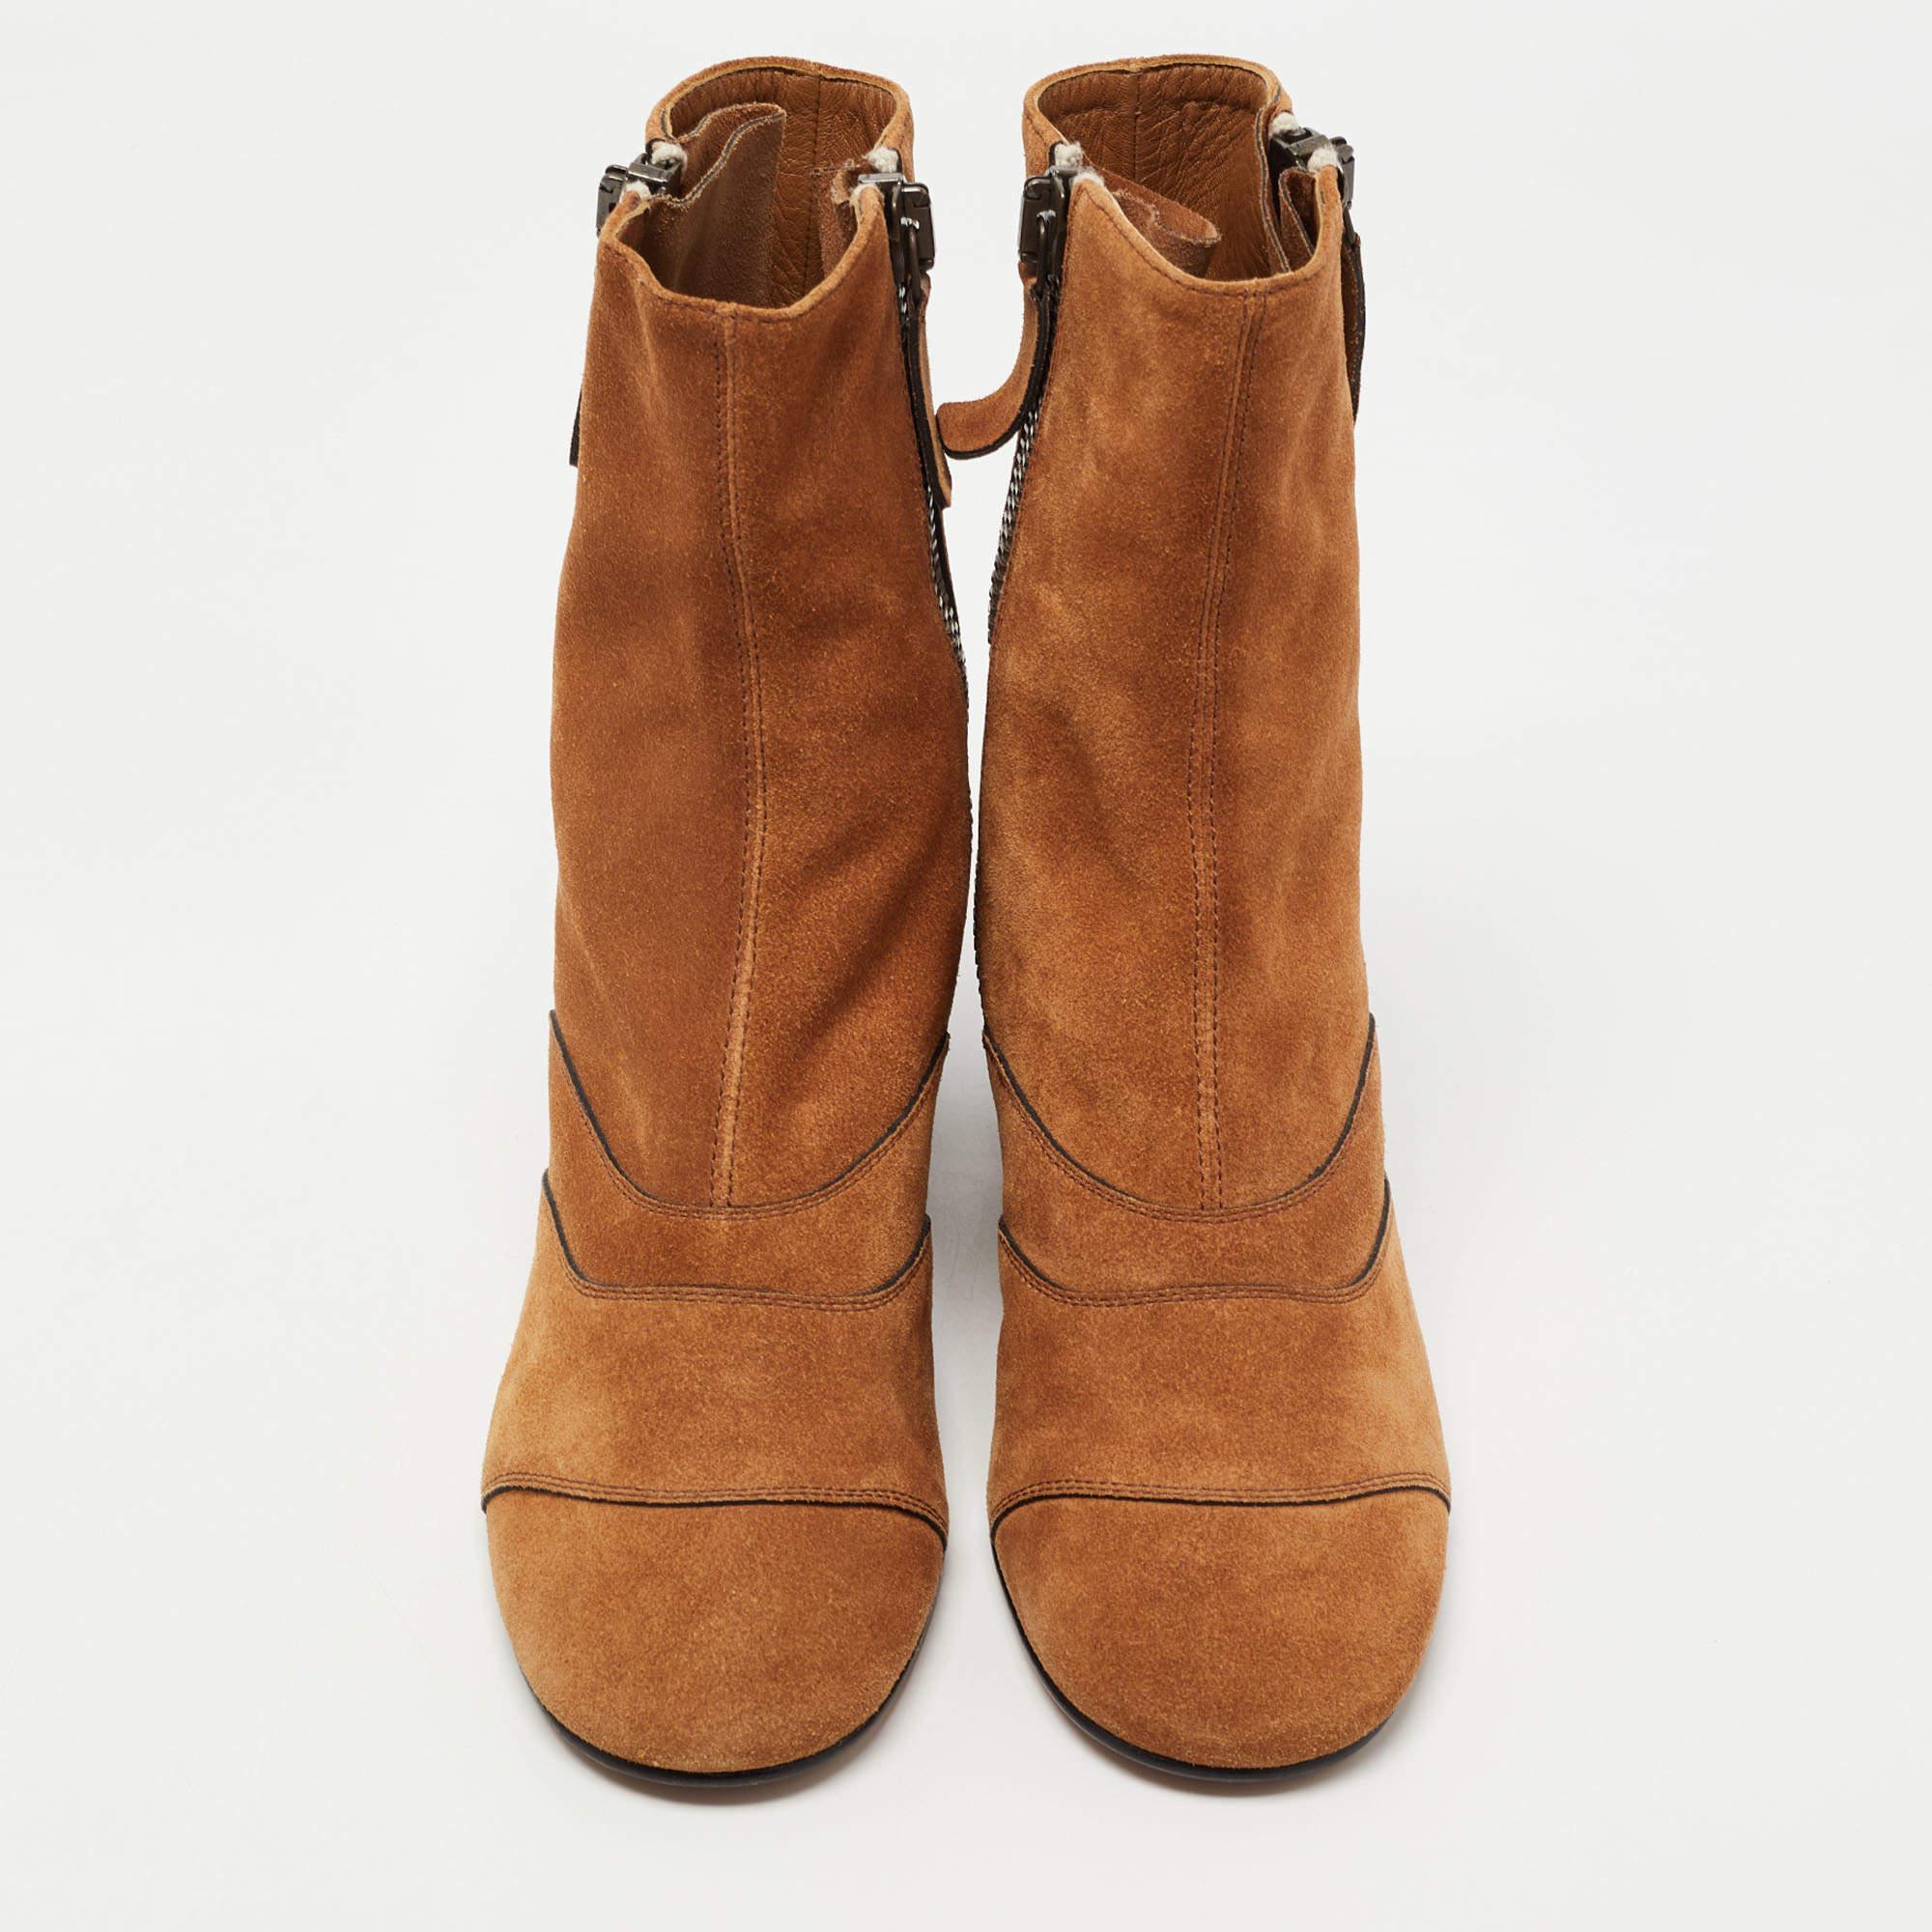 Boots are an essential part of your wardrobe, and these boots crafted from top-quality materials, are a fine choice. Offering the best of comfort and style, this sturdy-soled pair would be great with skinny jeans for a casual day out!

Includes: